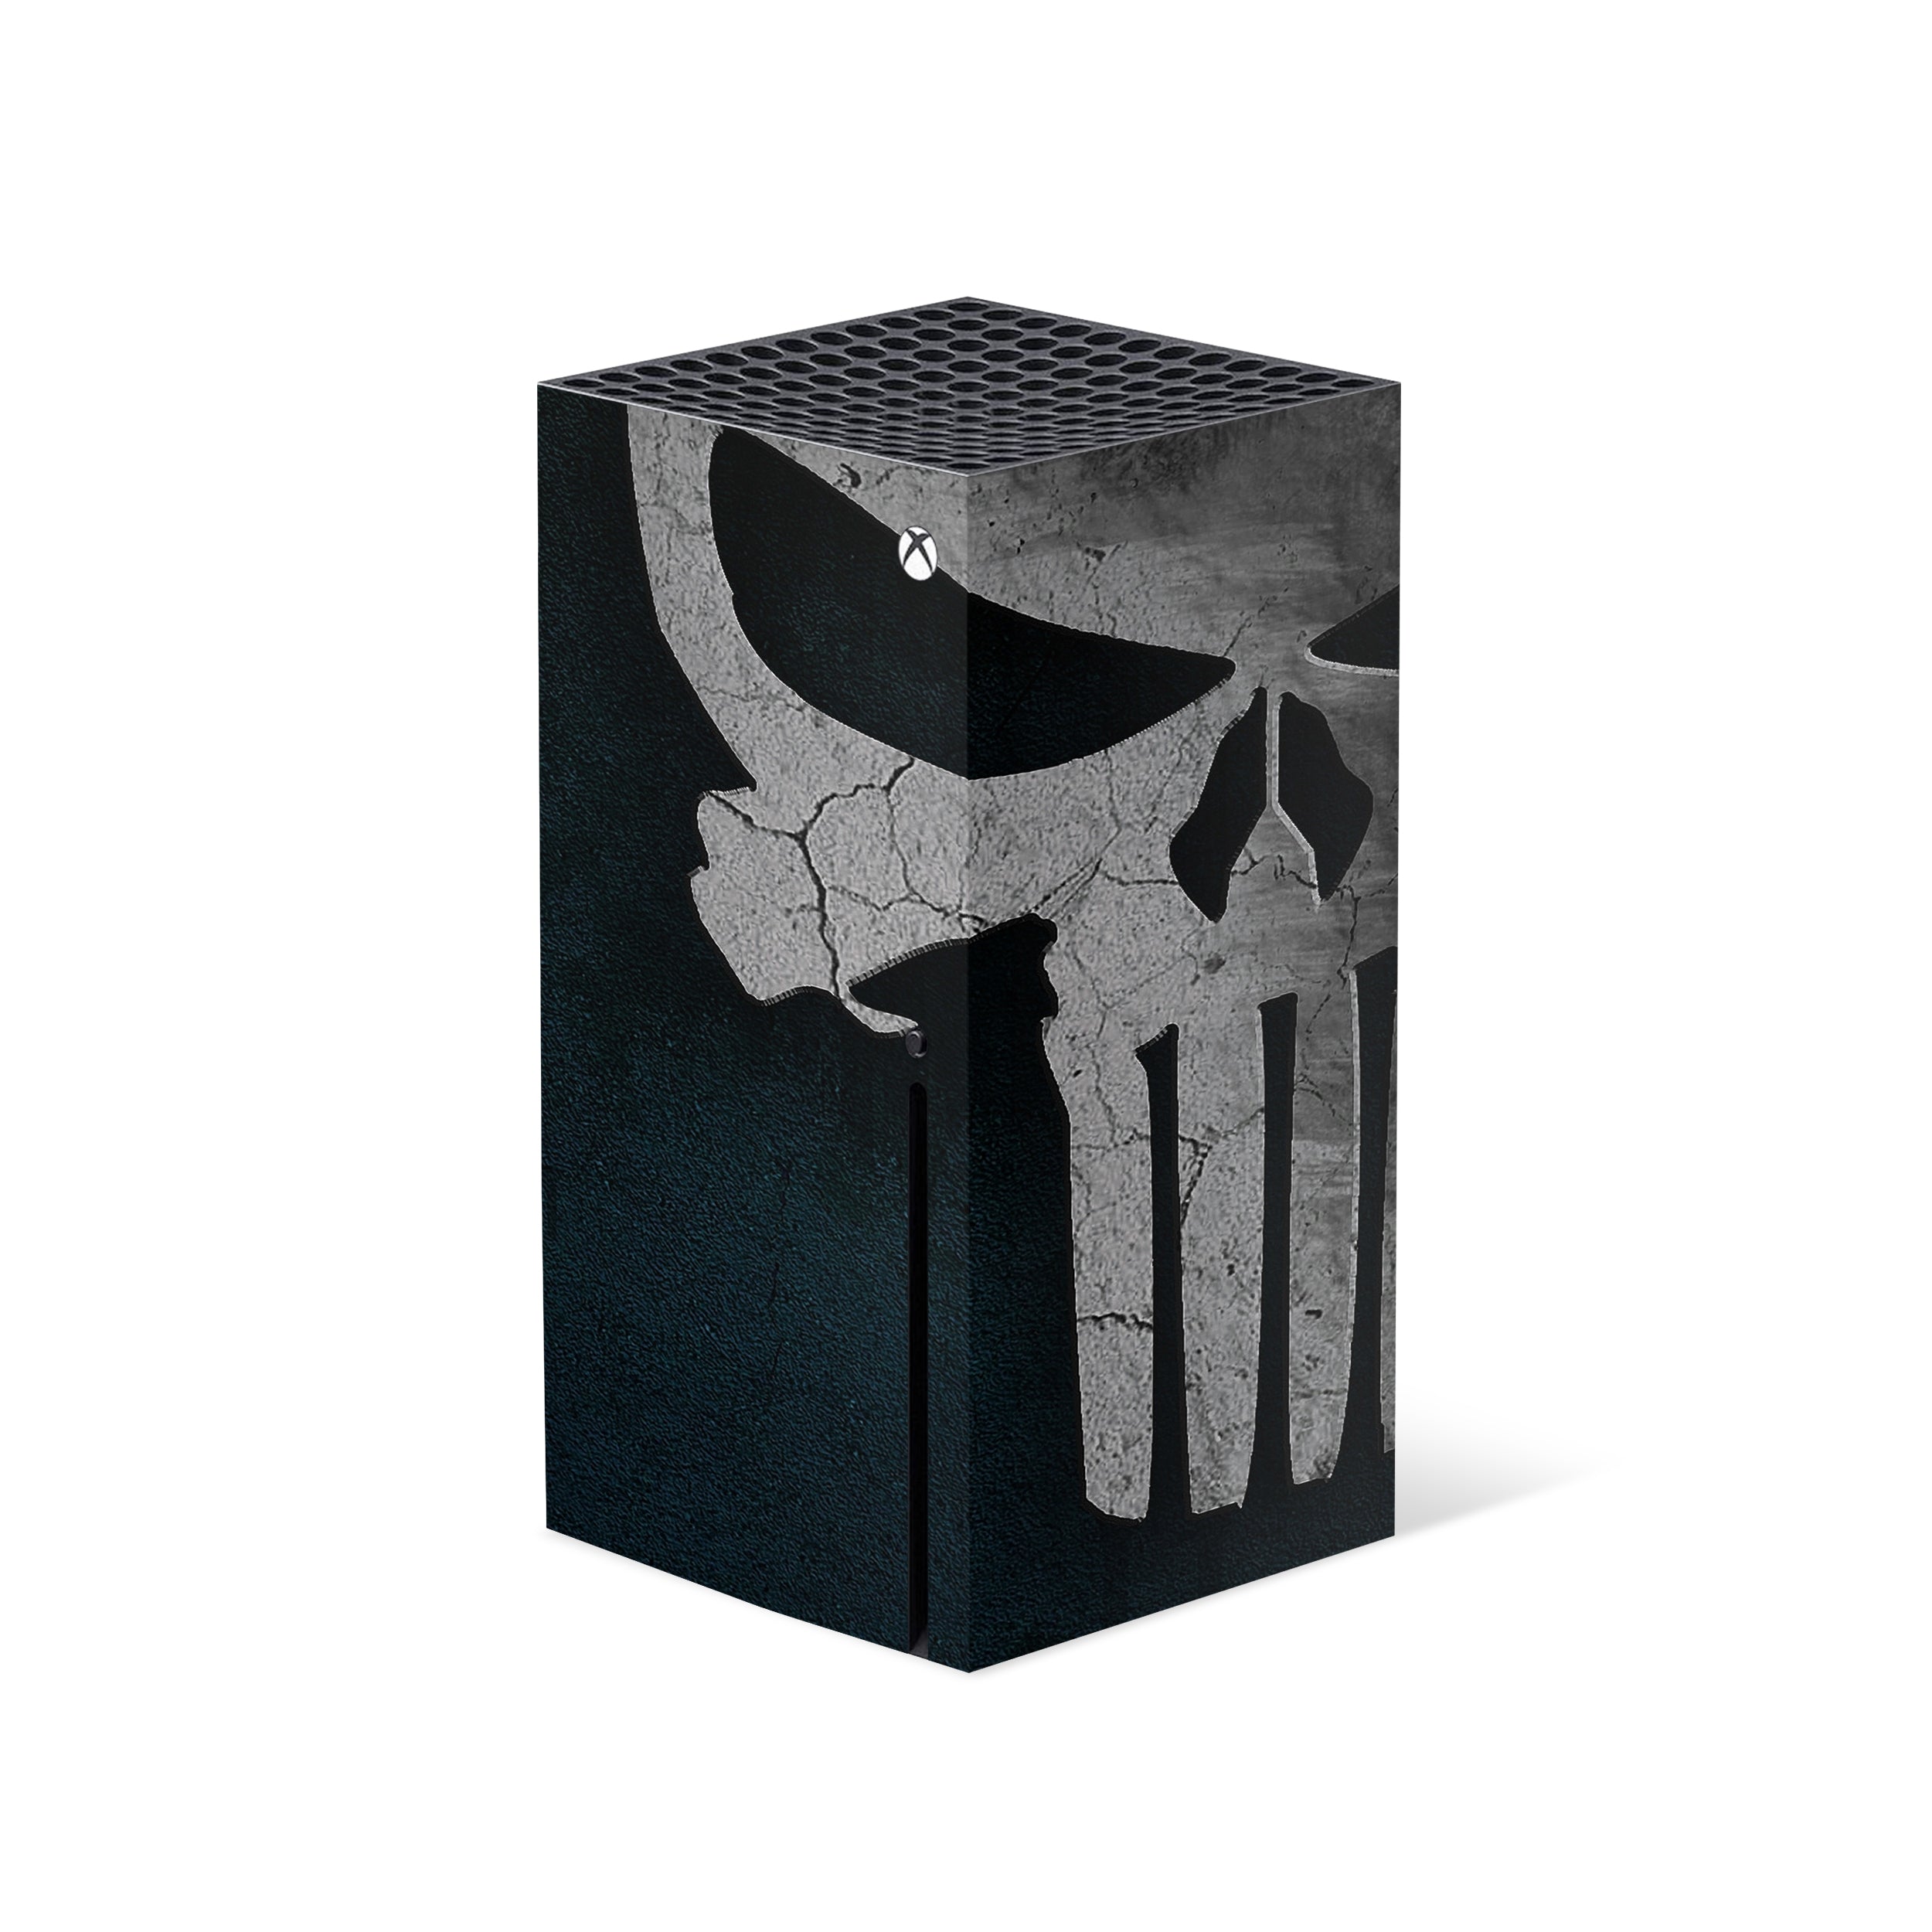 A video game skin featuring a Marvel The Punisher design for the Xbox Series X.